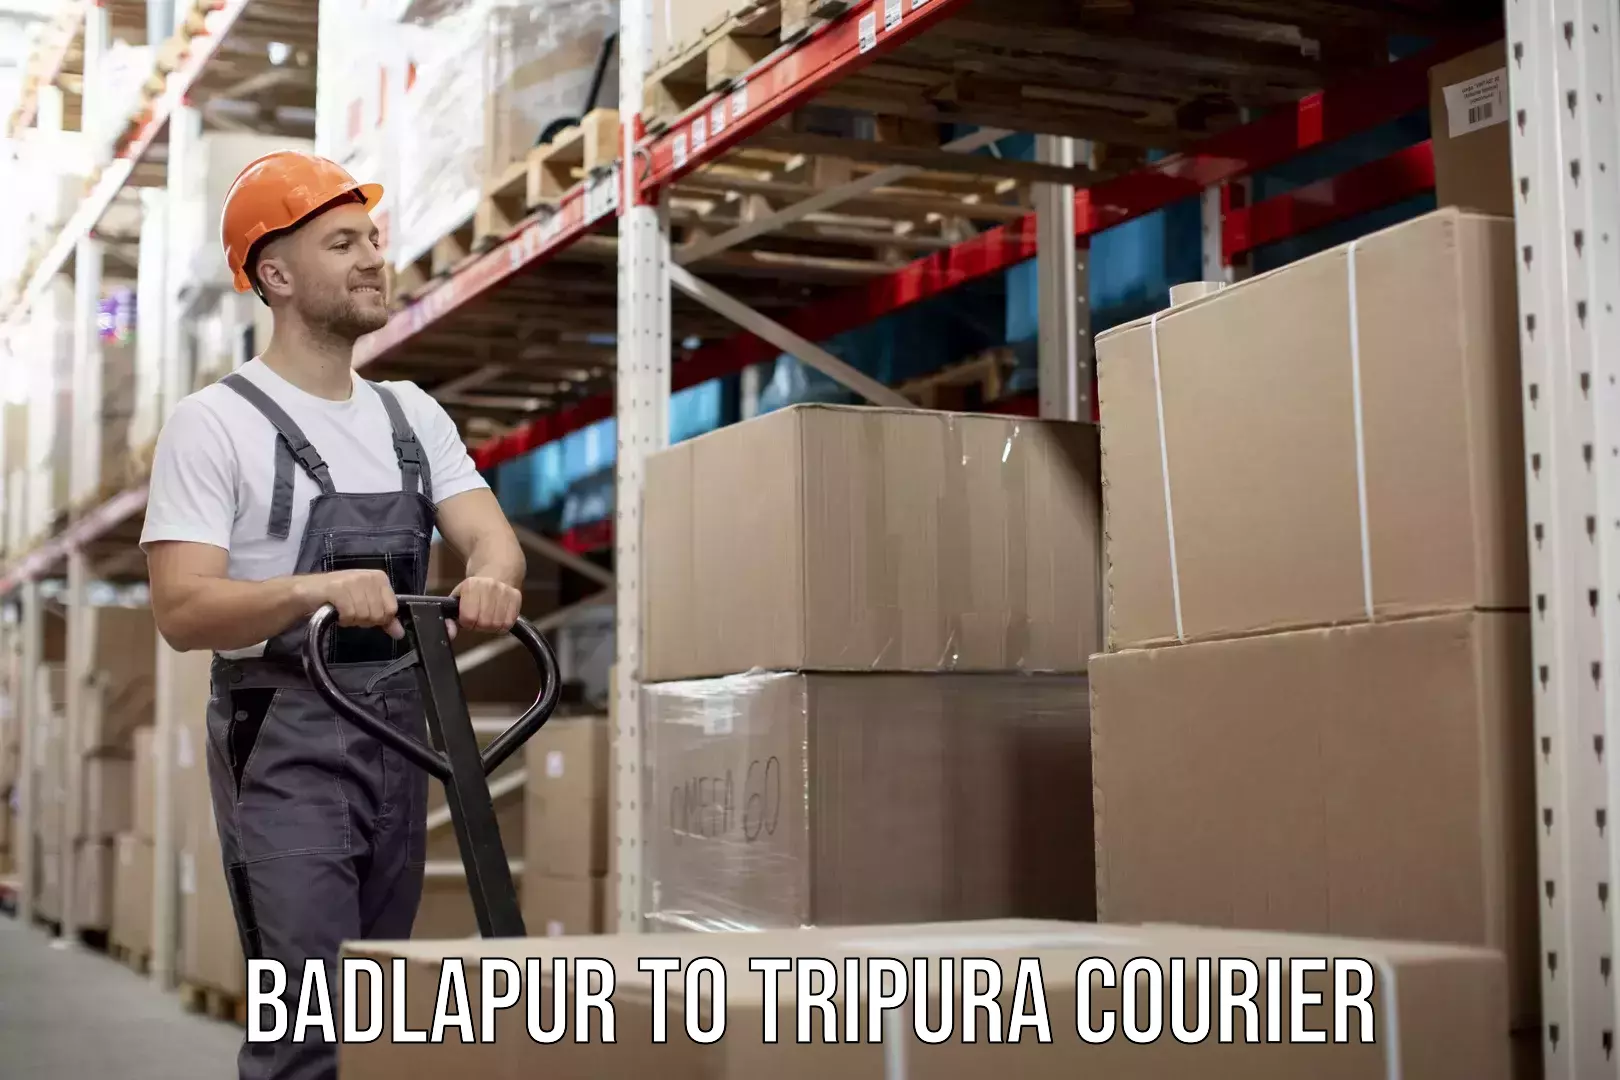 State-of-the-art courier technology Badlapur to Tripura